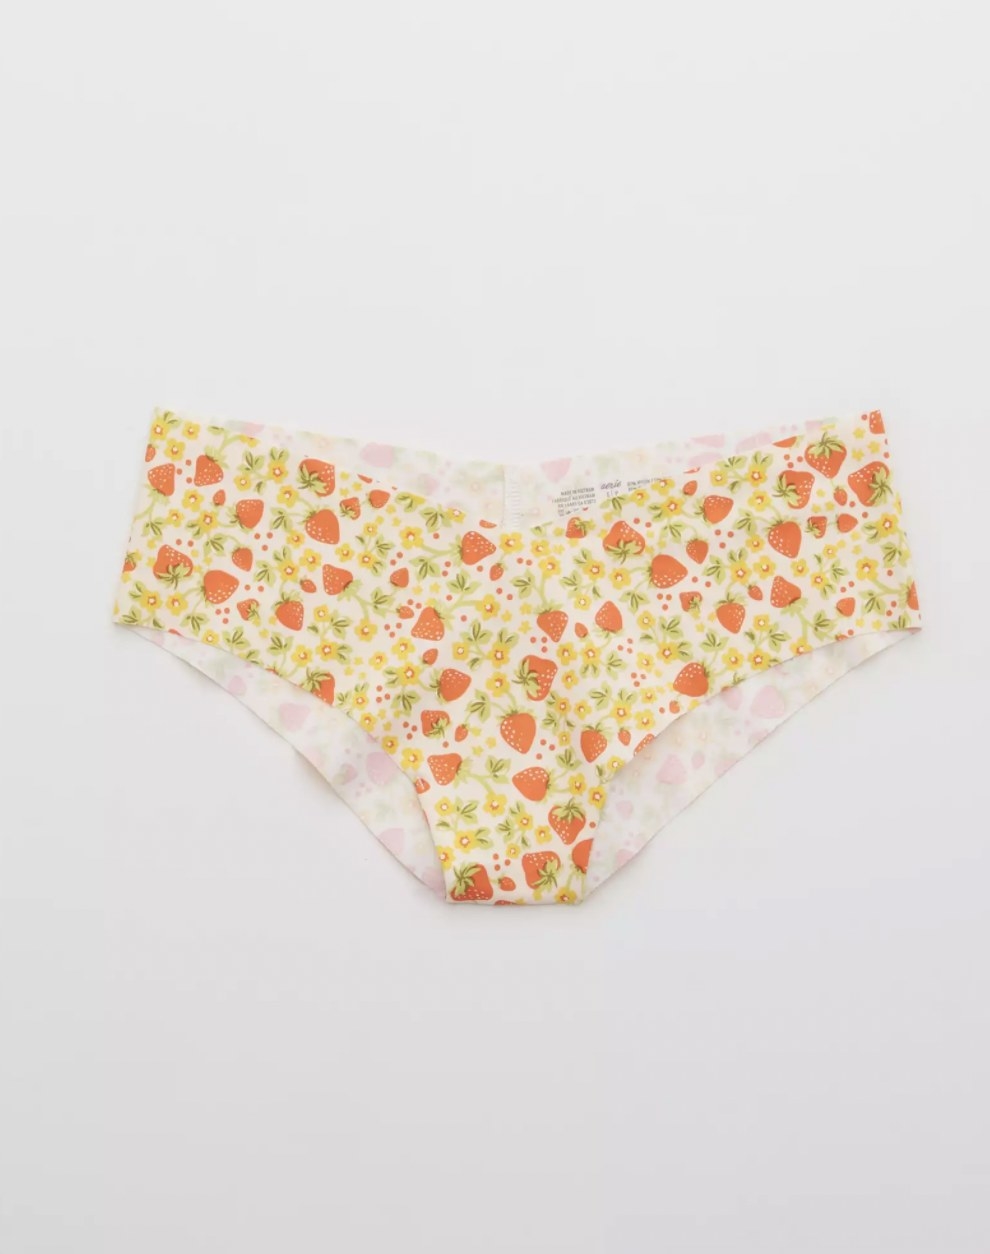 The cheeky thong with raw edges in floral and strawberry print pattern